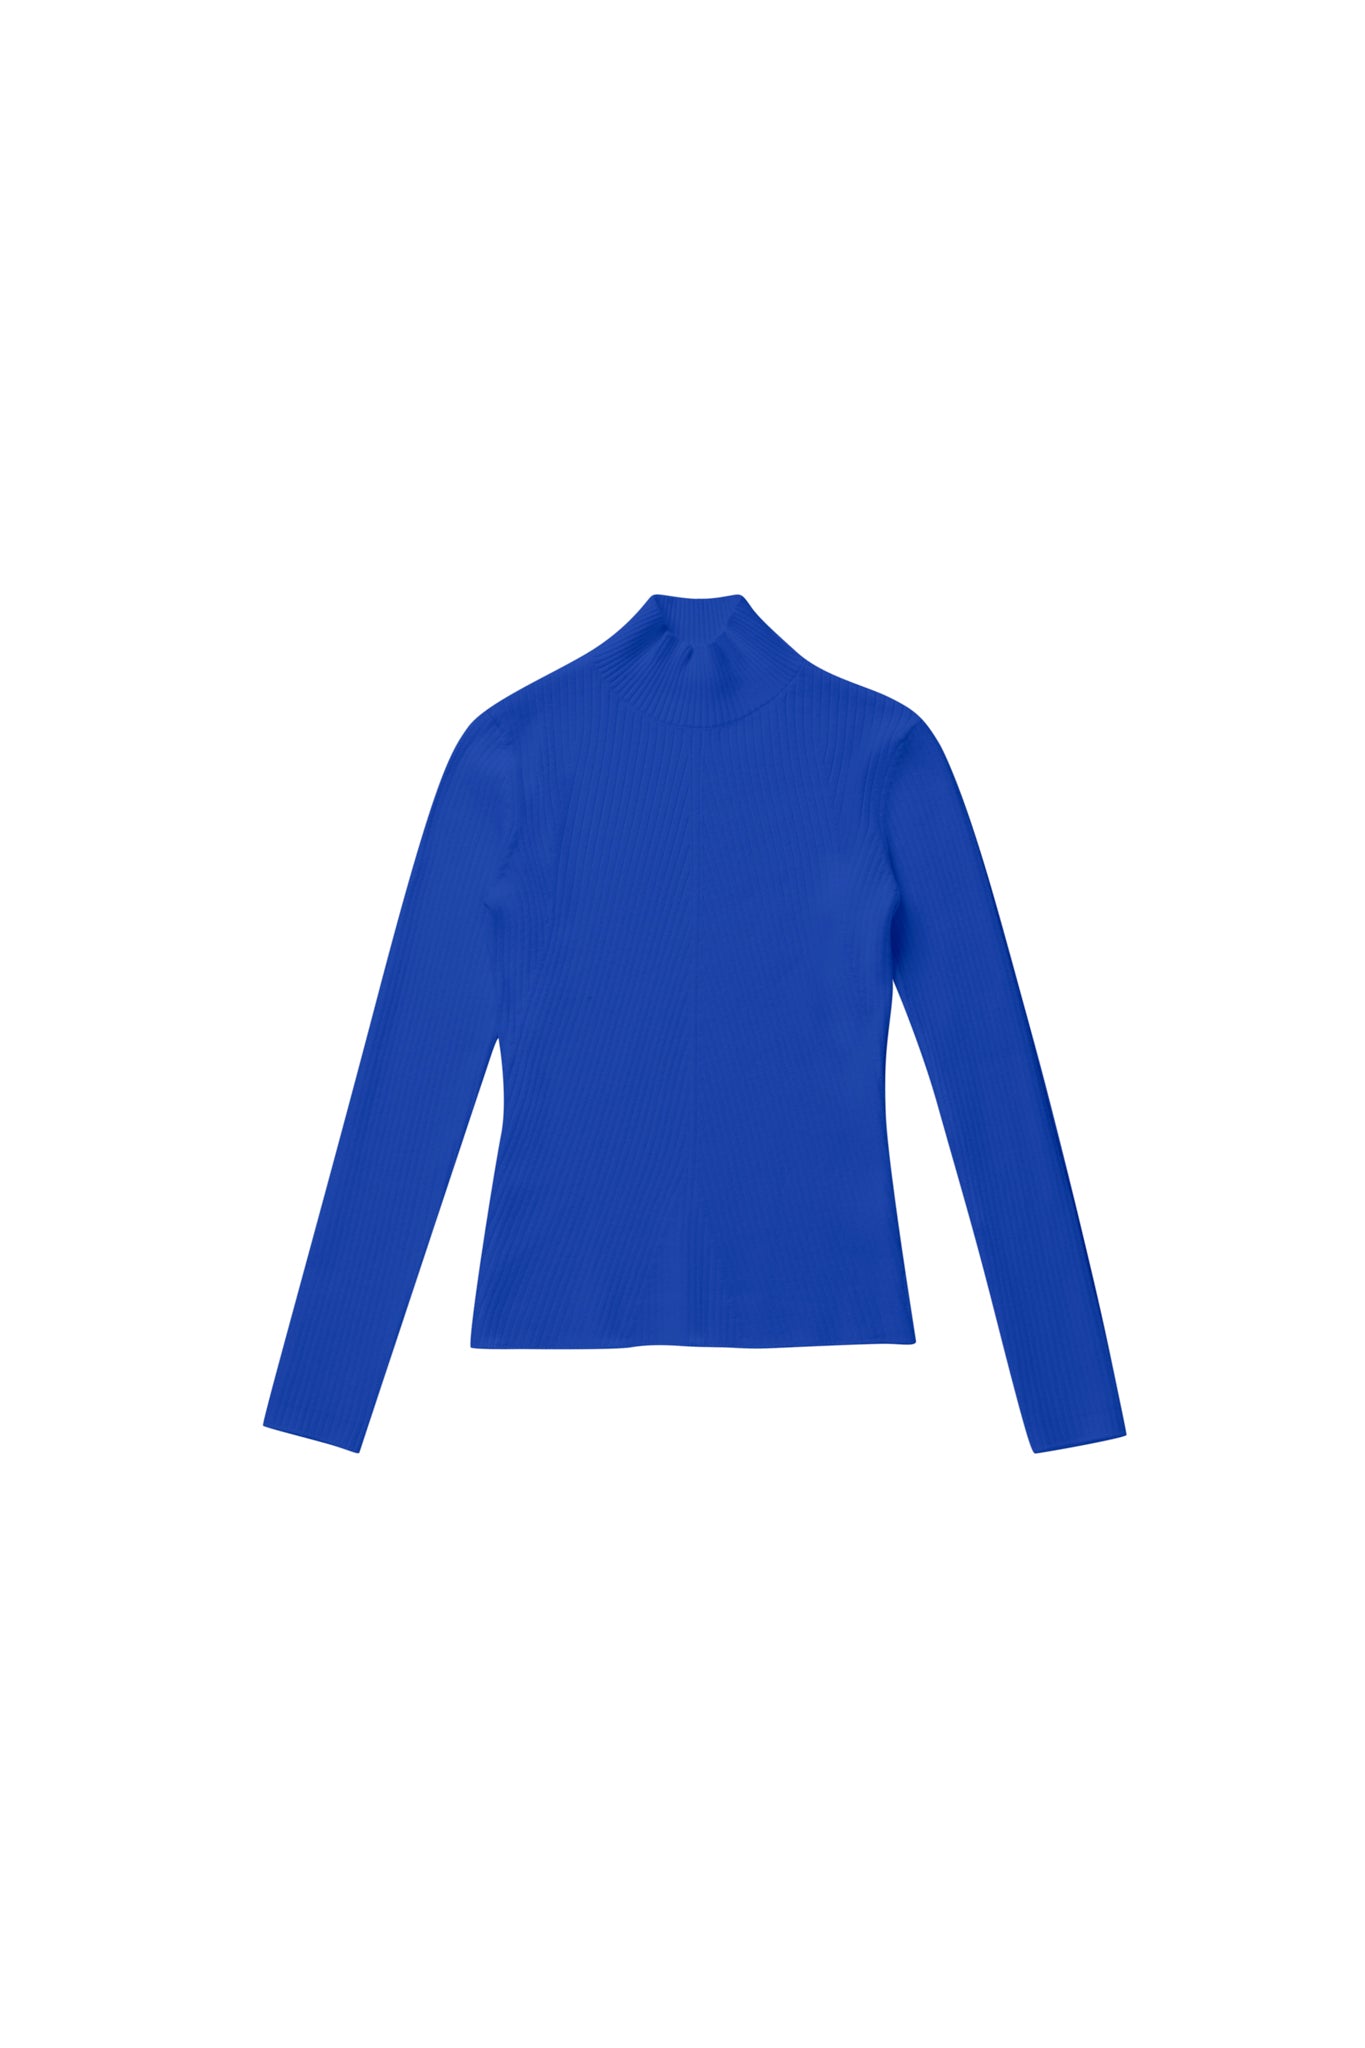 High Neck Sweater in Royal Blue #8131ZK